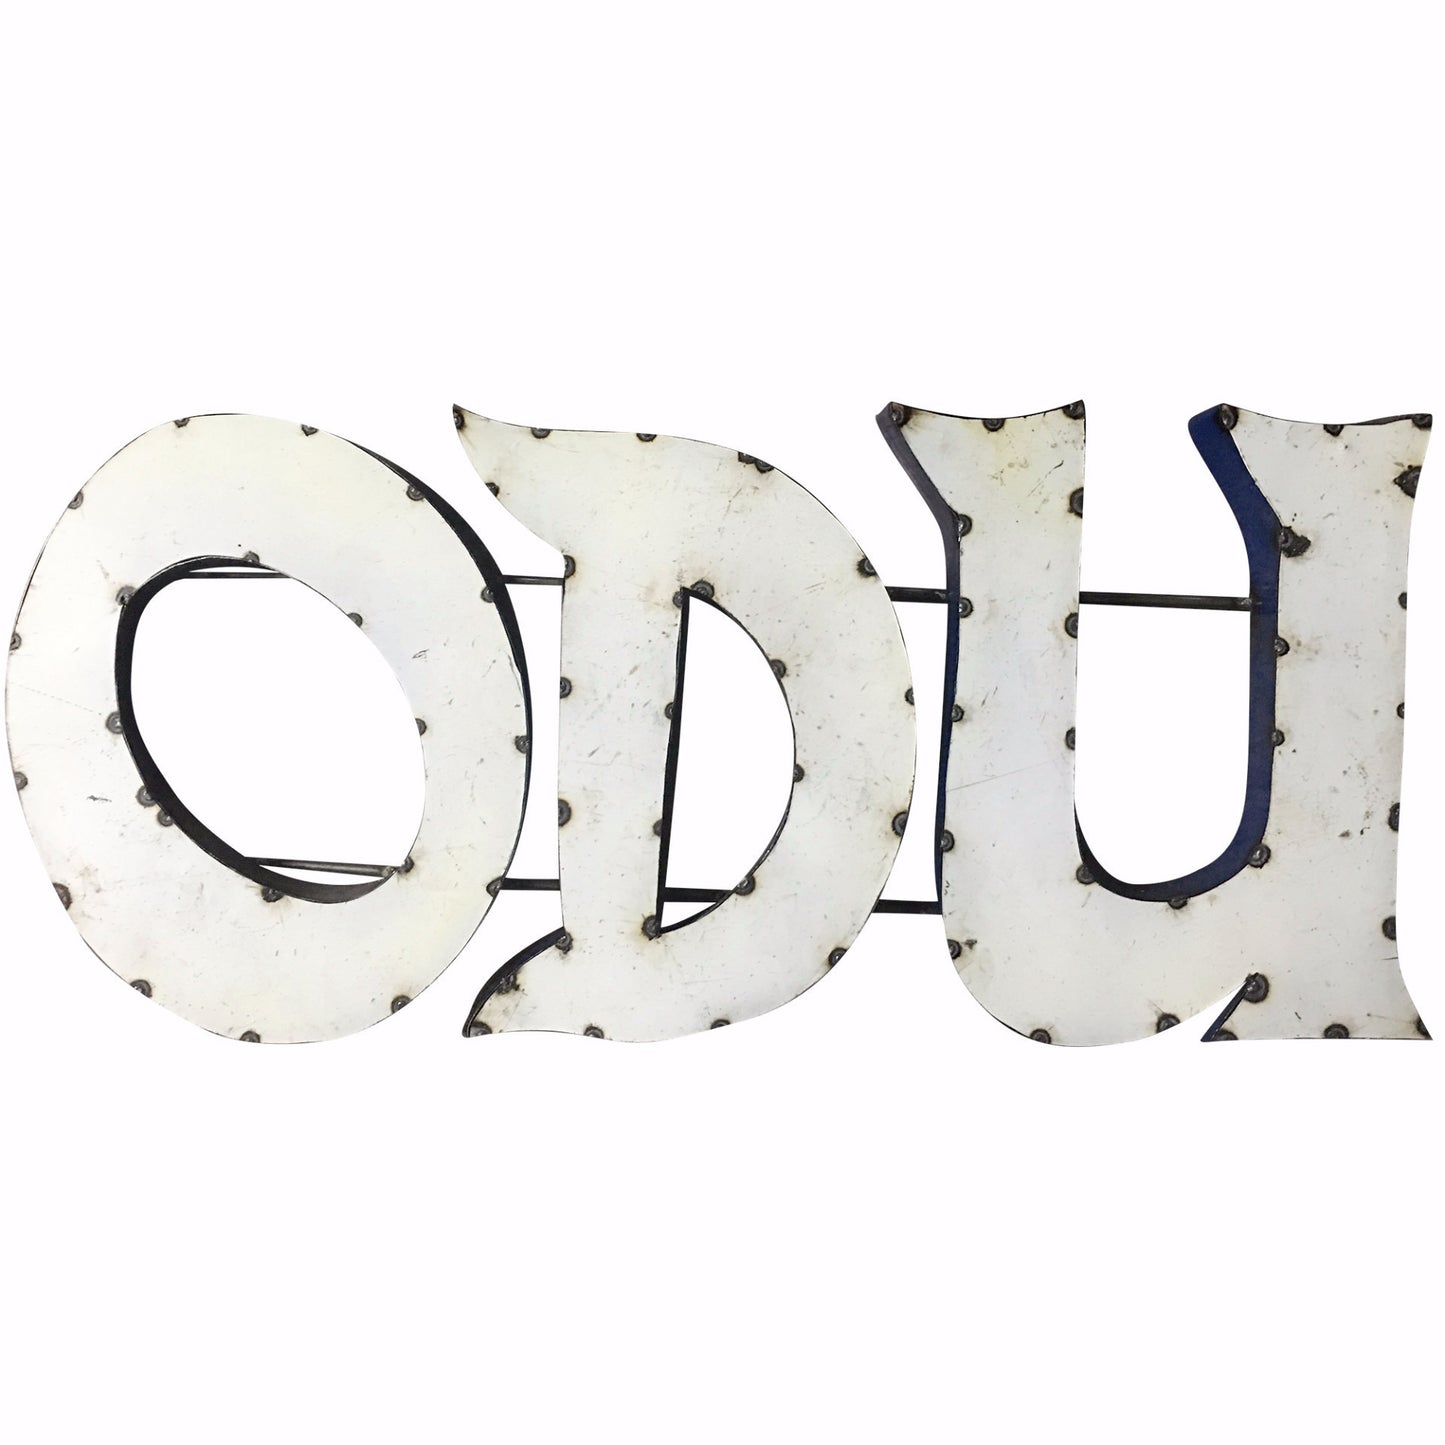 Old Dominion University "ODU" Recycled Metal Wall Decor